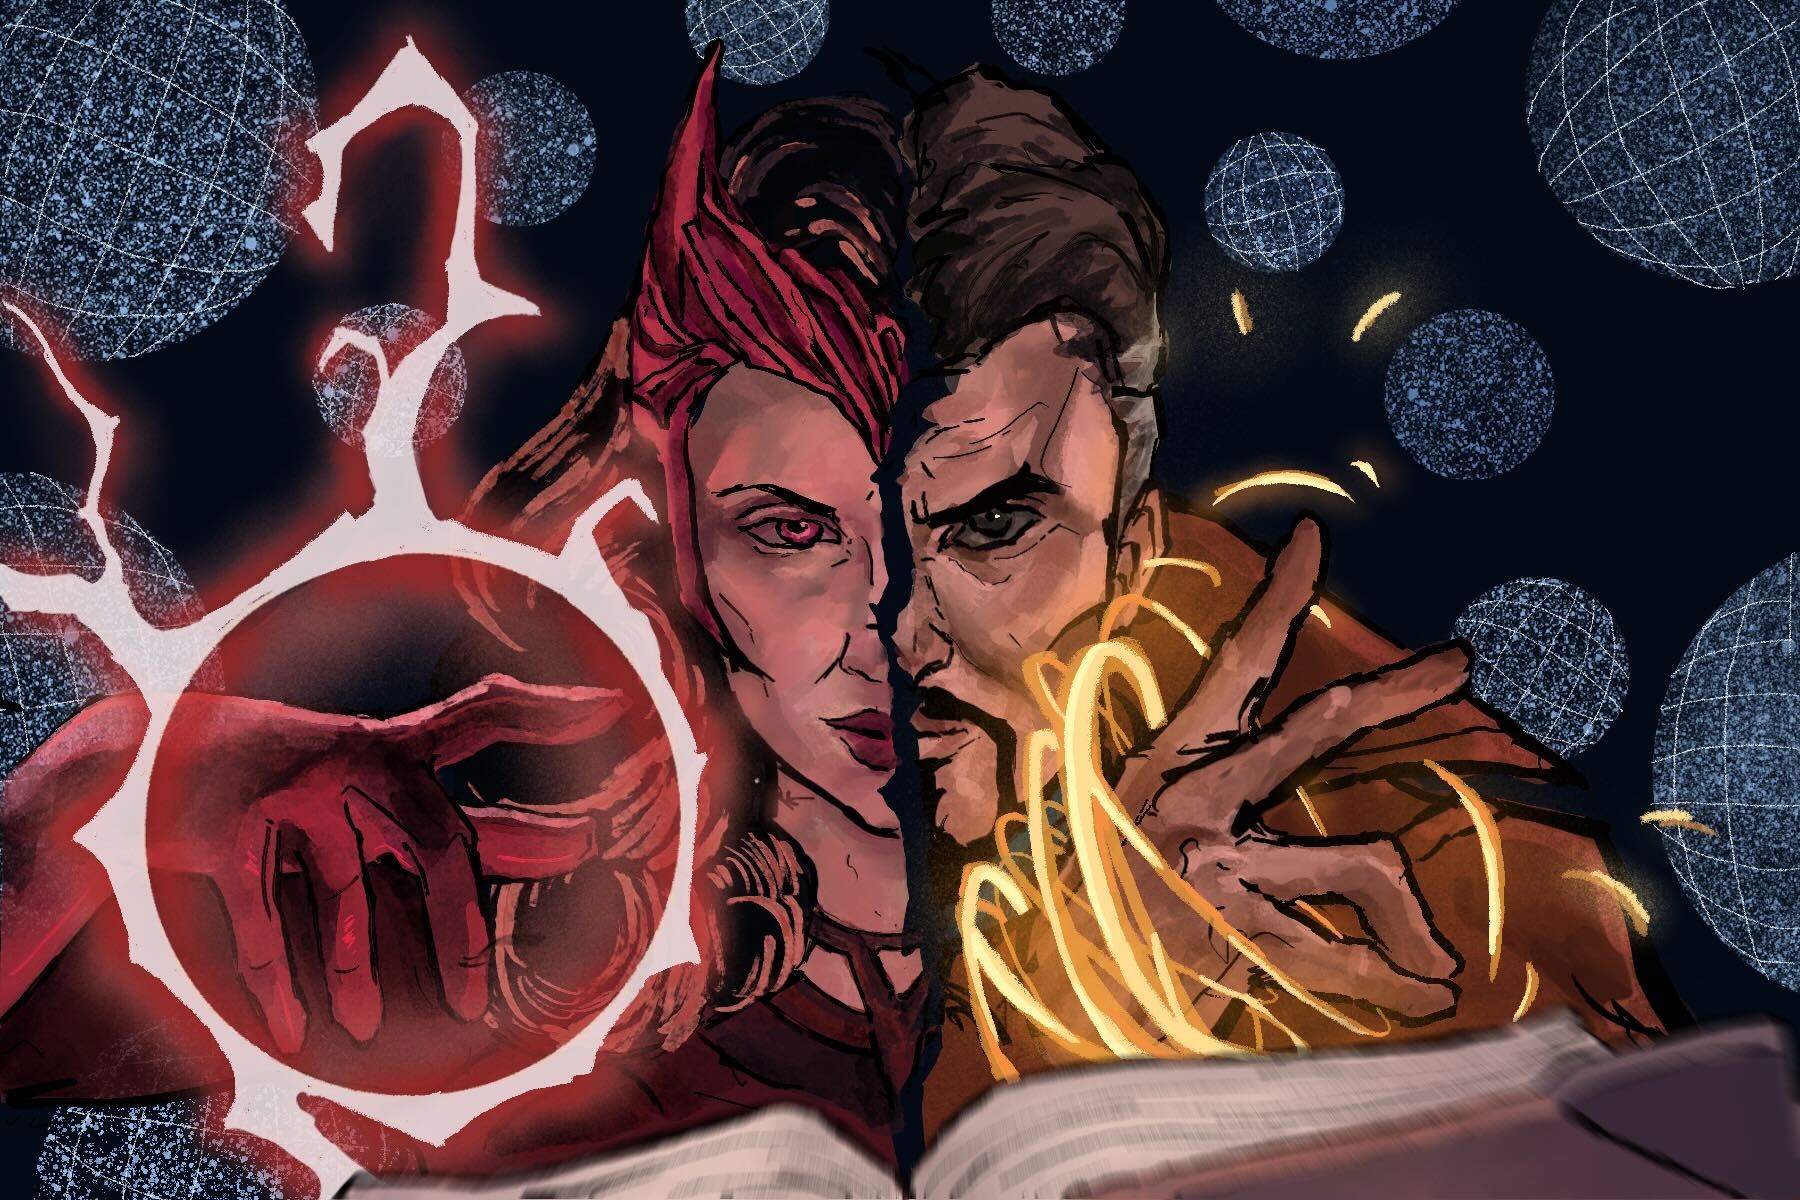 In an article about the Multiverse in Doctor Strange, an illustration of Doctor Strange and Wanda Maximoff